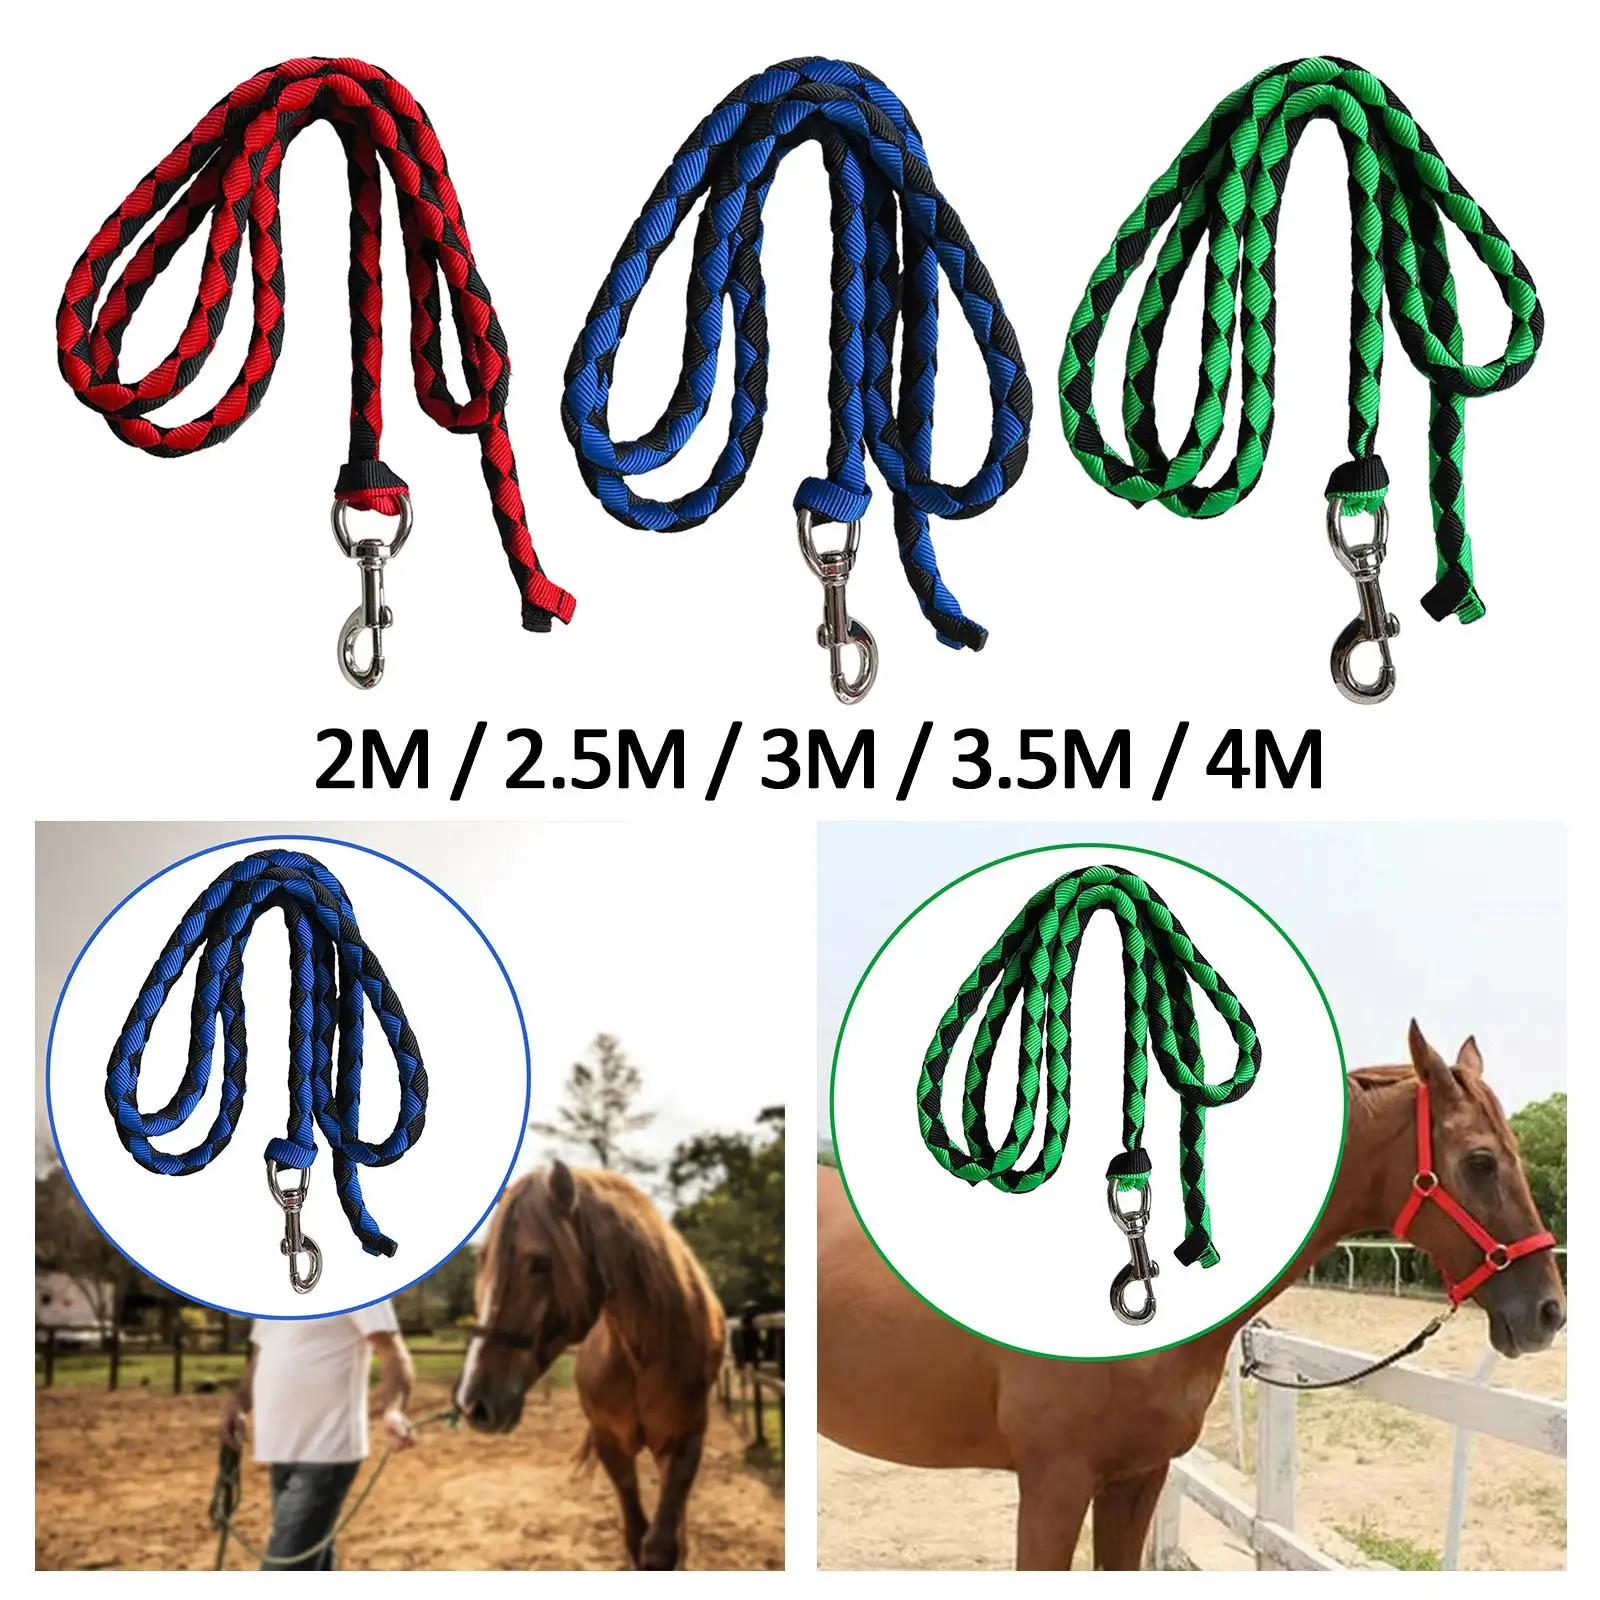 Horse Lead Rope Practical Horse Leads Durable Swivel Buckle for Pony, Donkey,